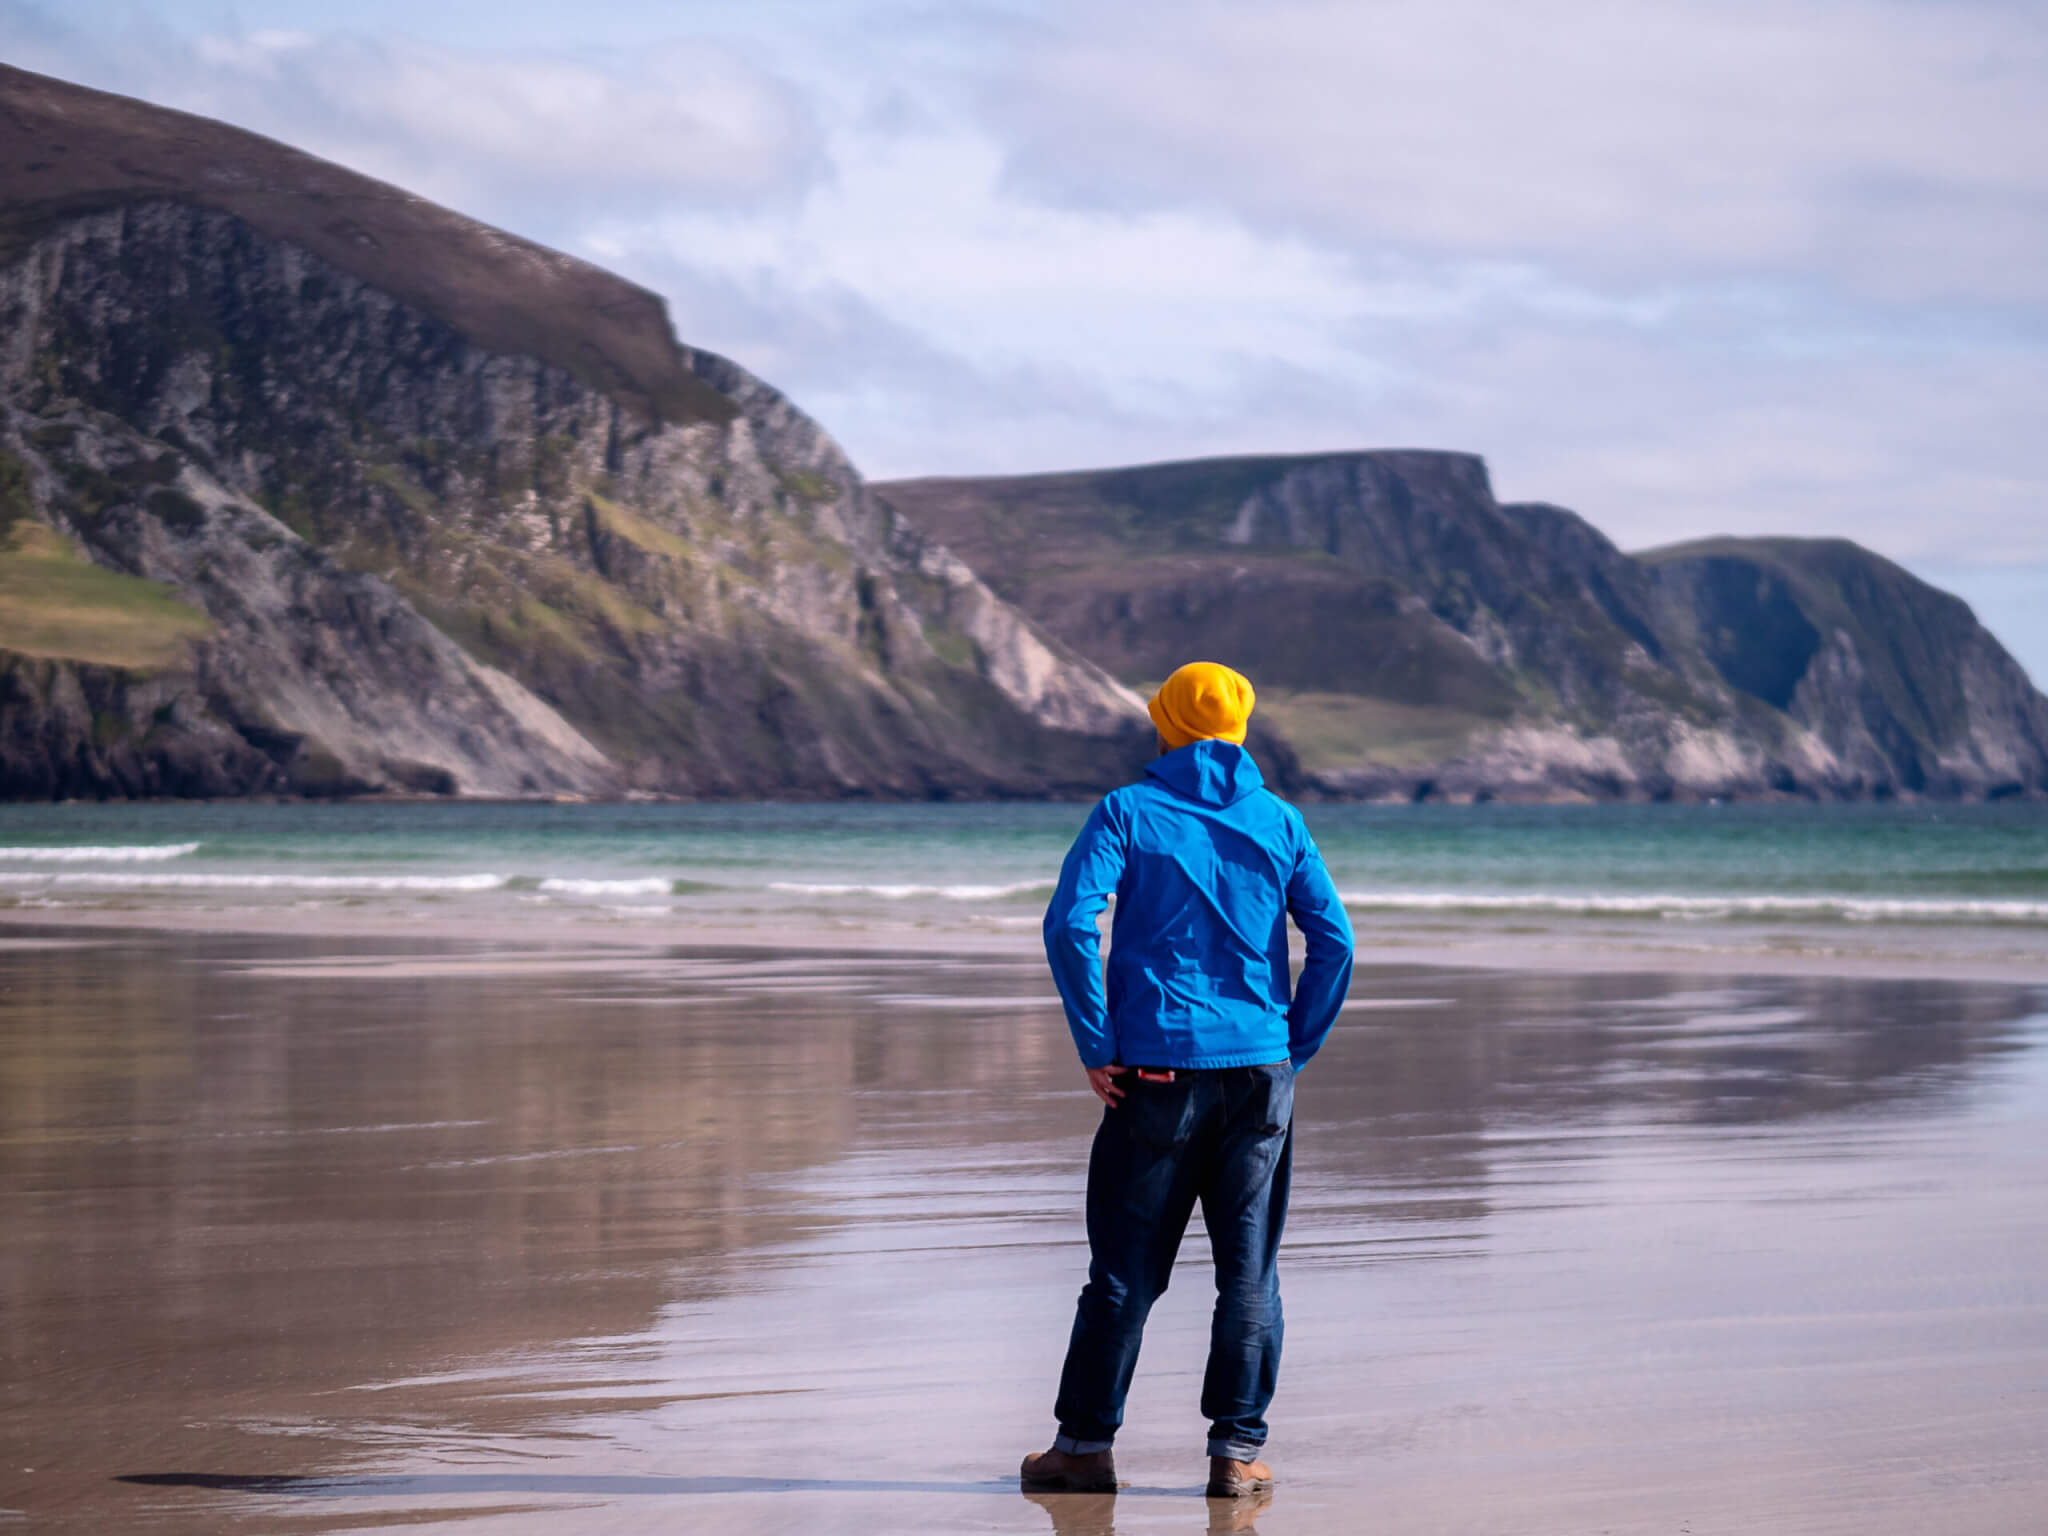 Slim man in blue jacket and yellow hat walking on a wet sand of a beach with beautiful nature scenery in the background. Keel beach, Ireland. Travel and tourism concept. Male on vacation by water.